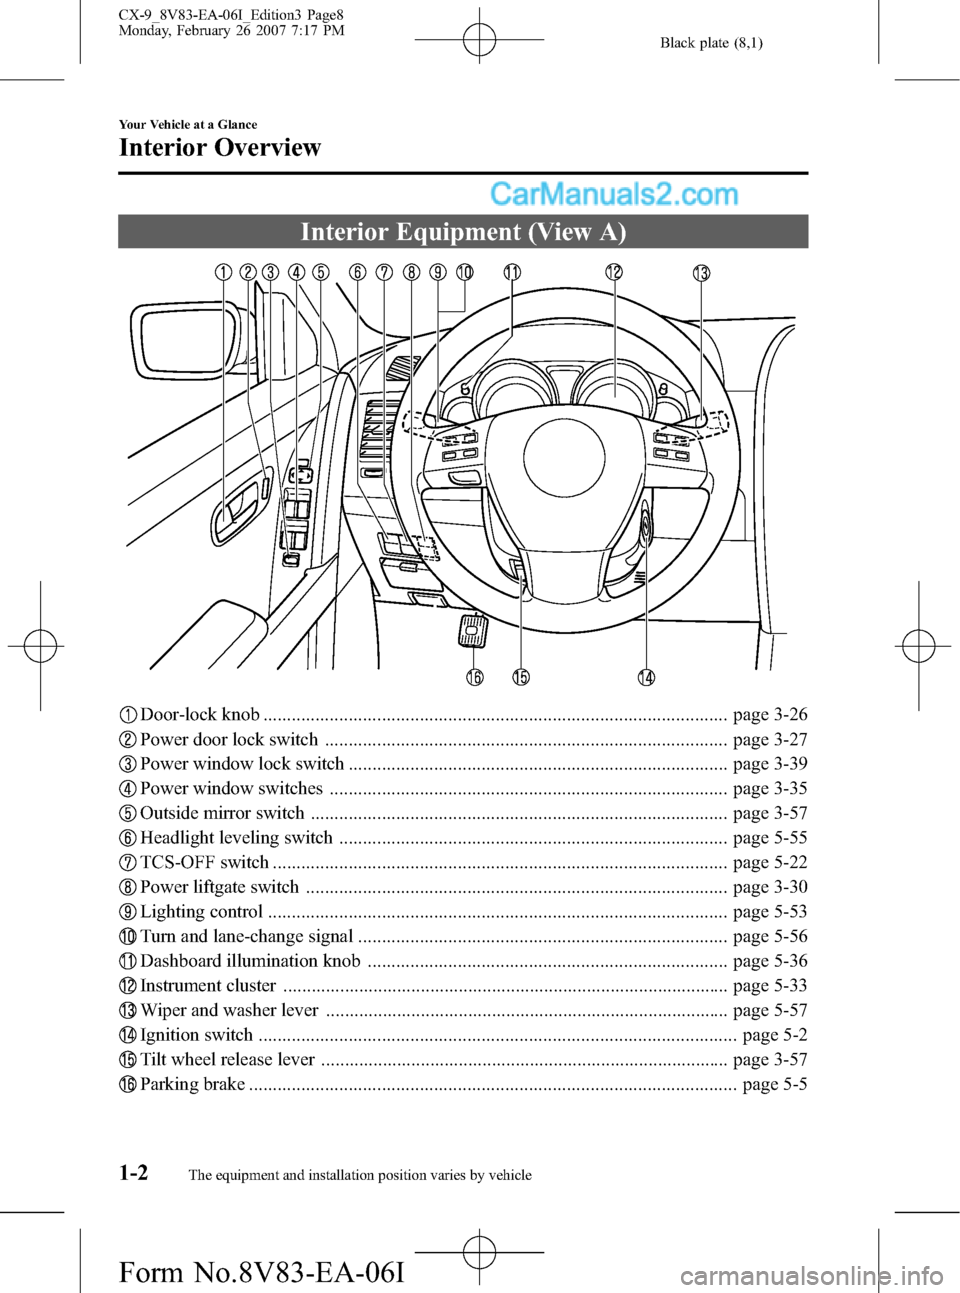 MAZDA MODEL CX-9 2007  Owners Manual (in English) Black plate (8,1)
Interior Equipment (View A)
Door-lock knob .................................................................................................. page 3-26
Power door lock switch .......